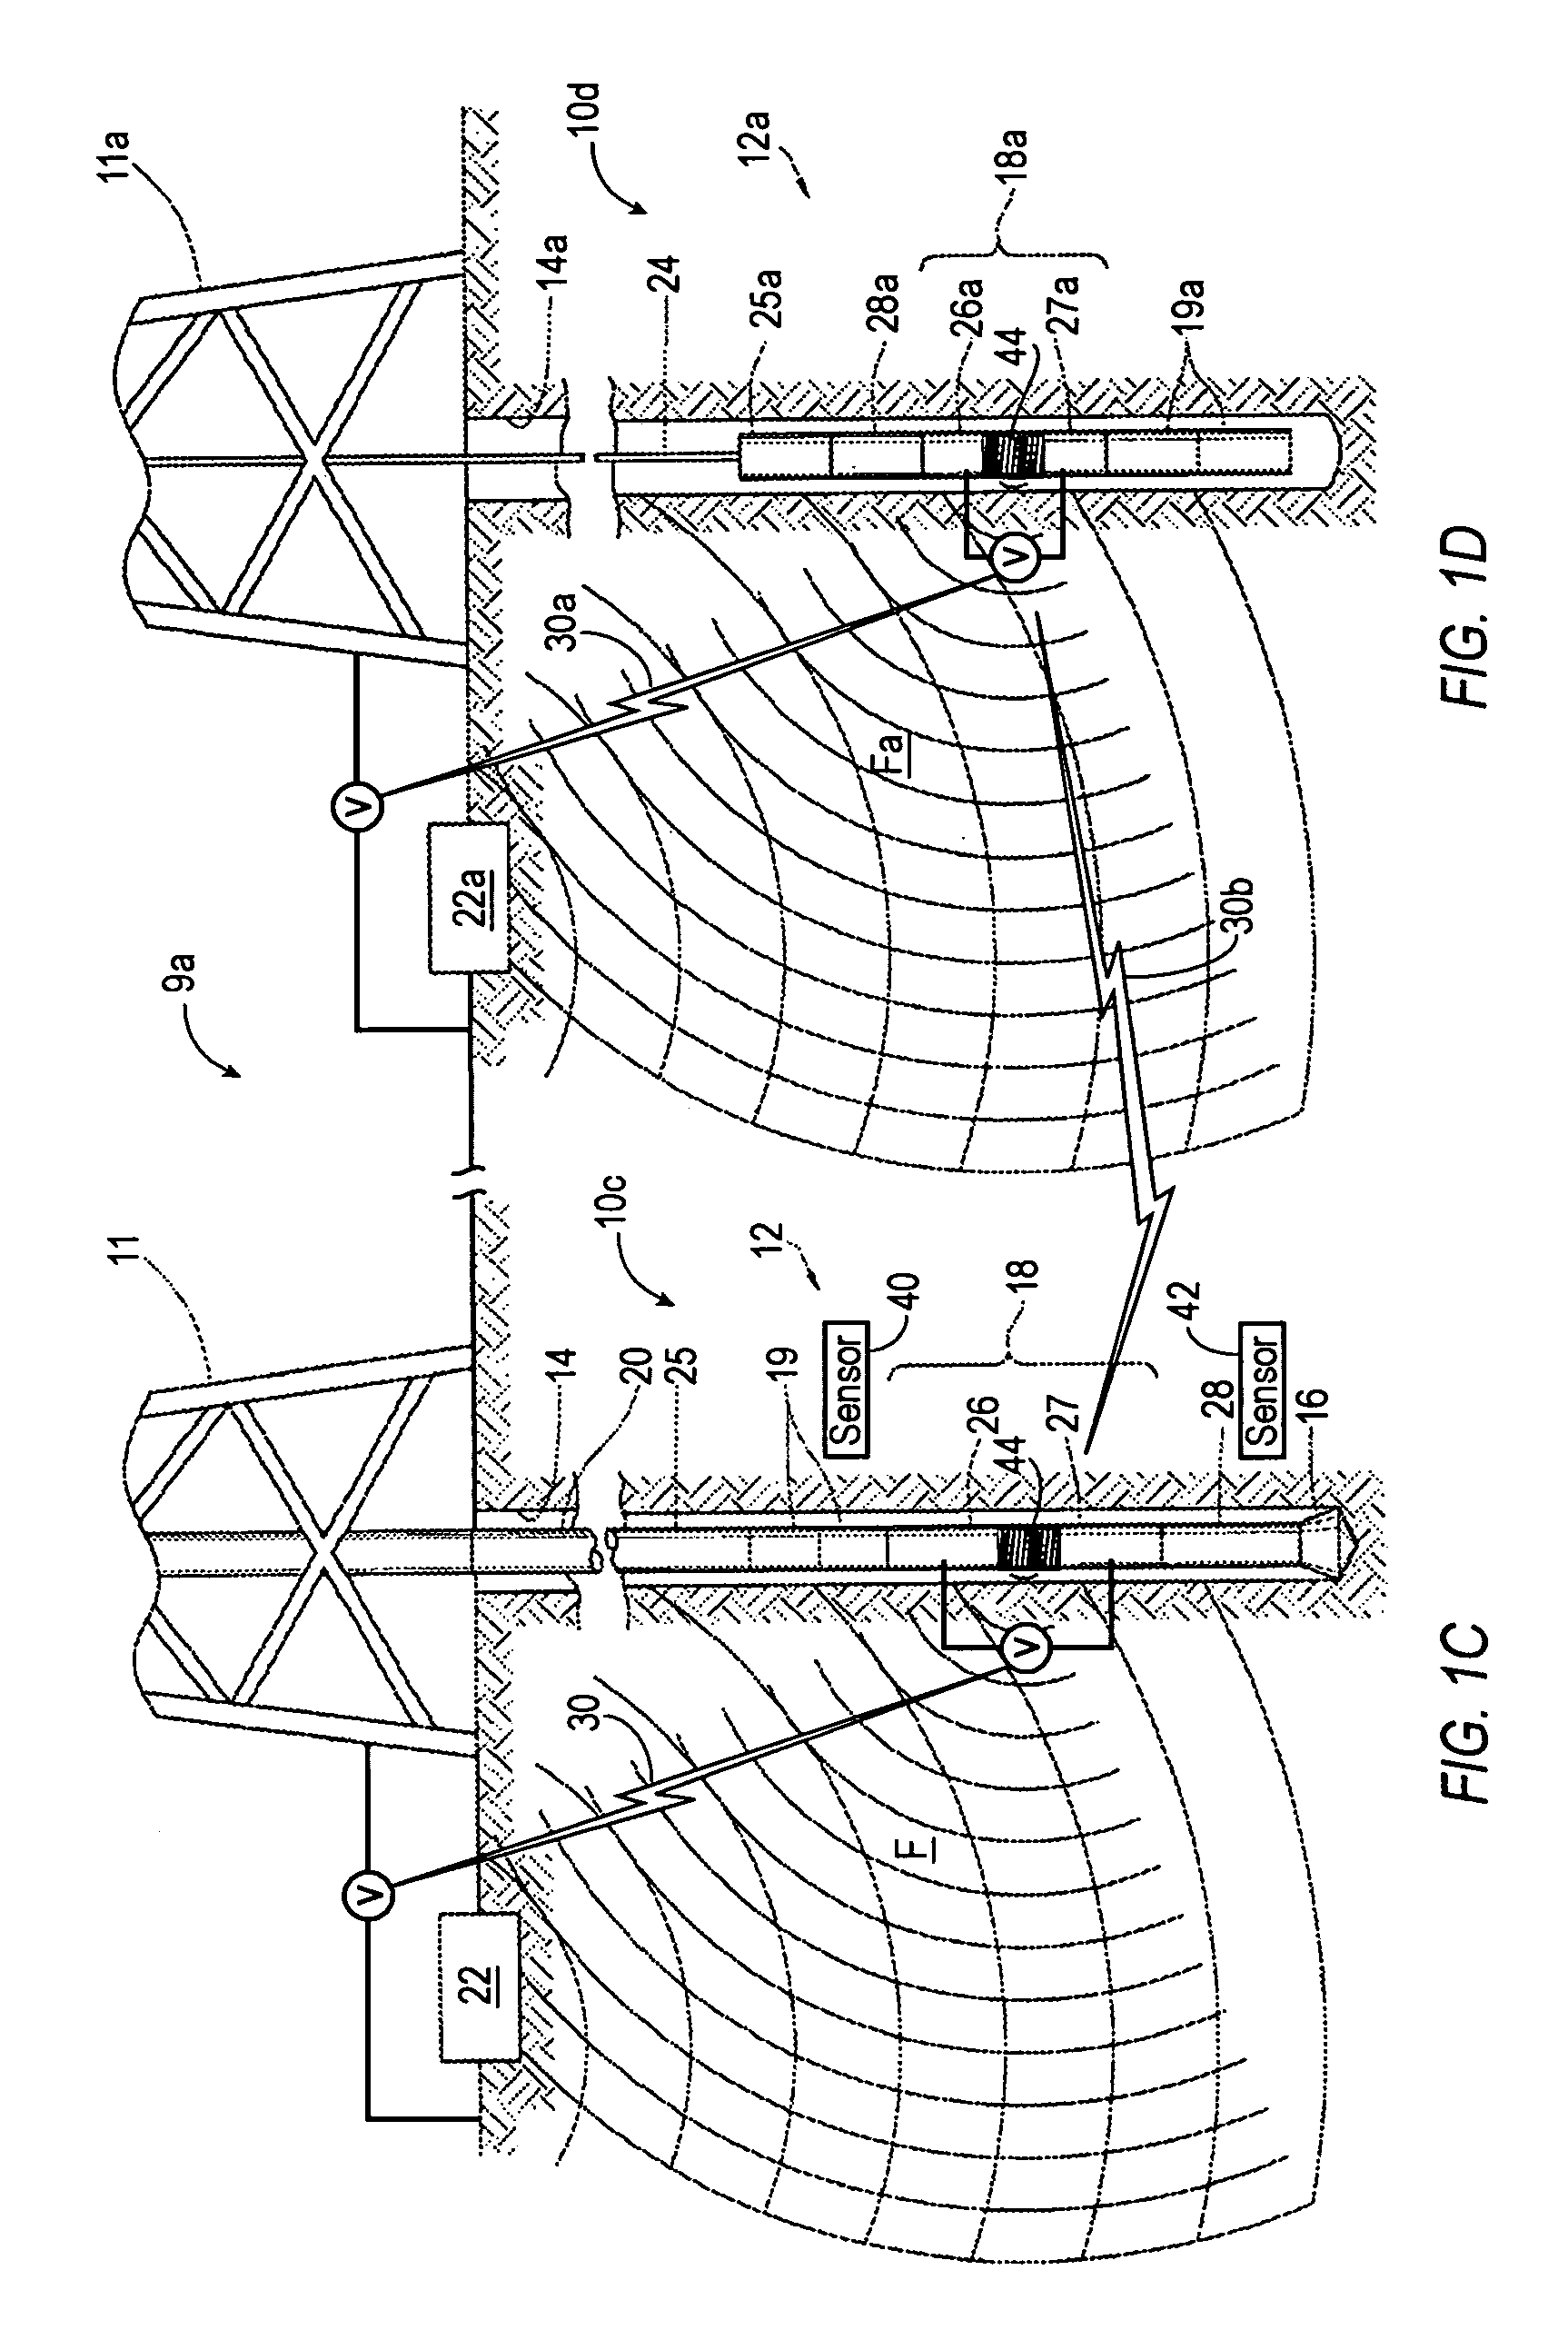 Formation evaluation system and method